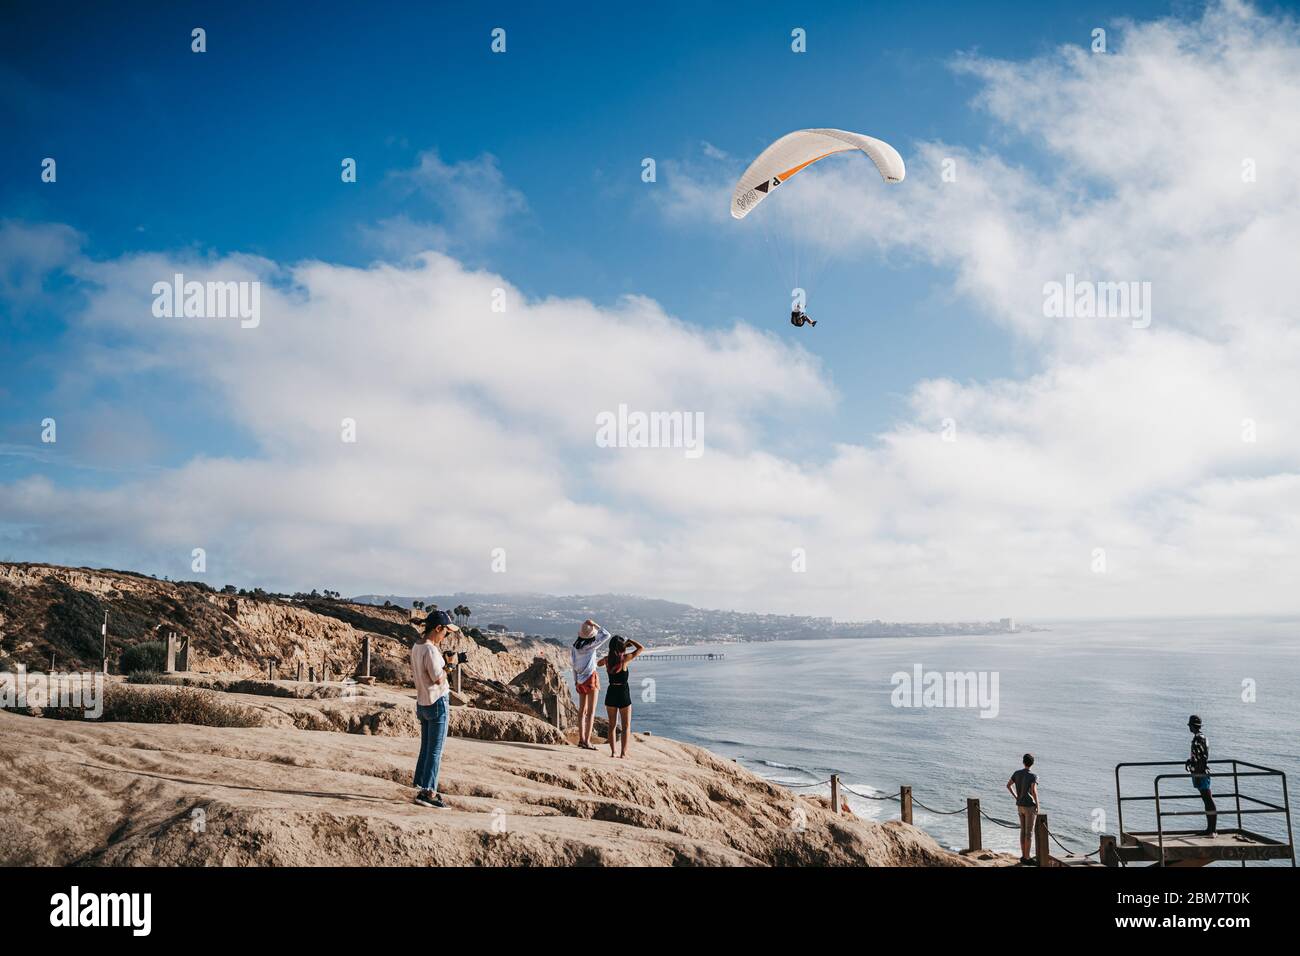 skydiving over California Stock Photo